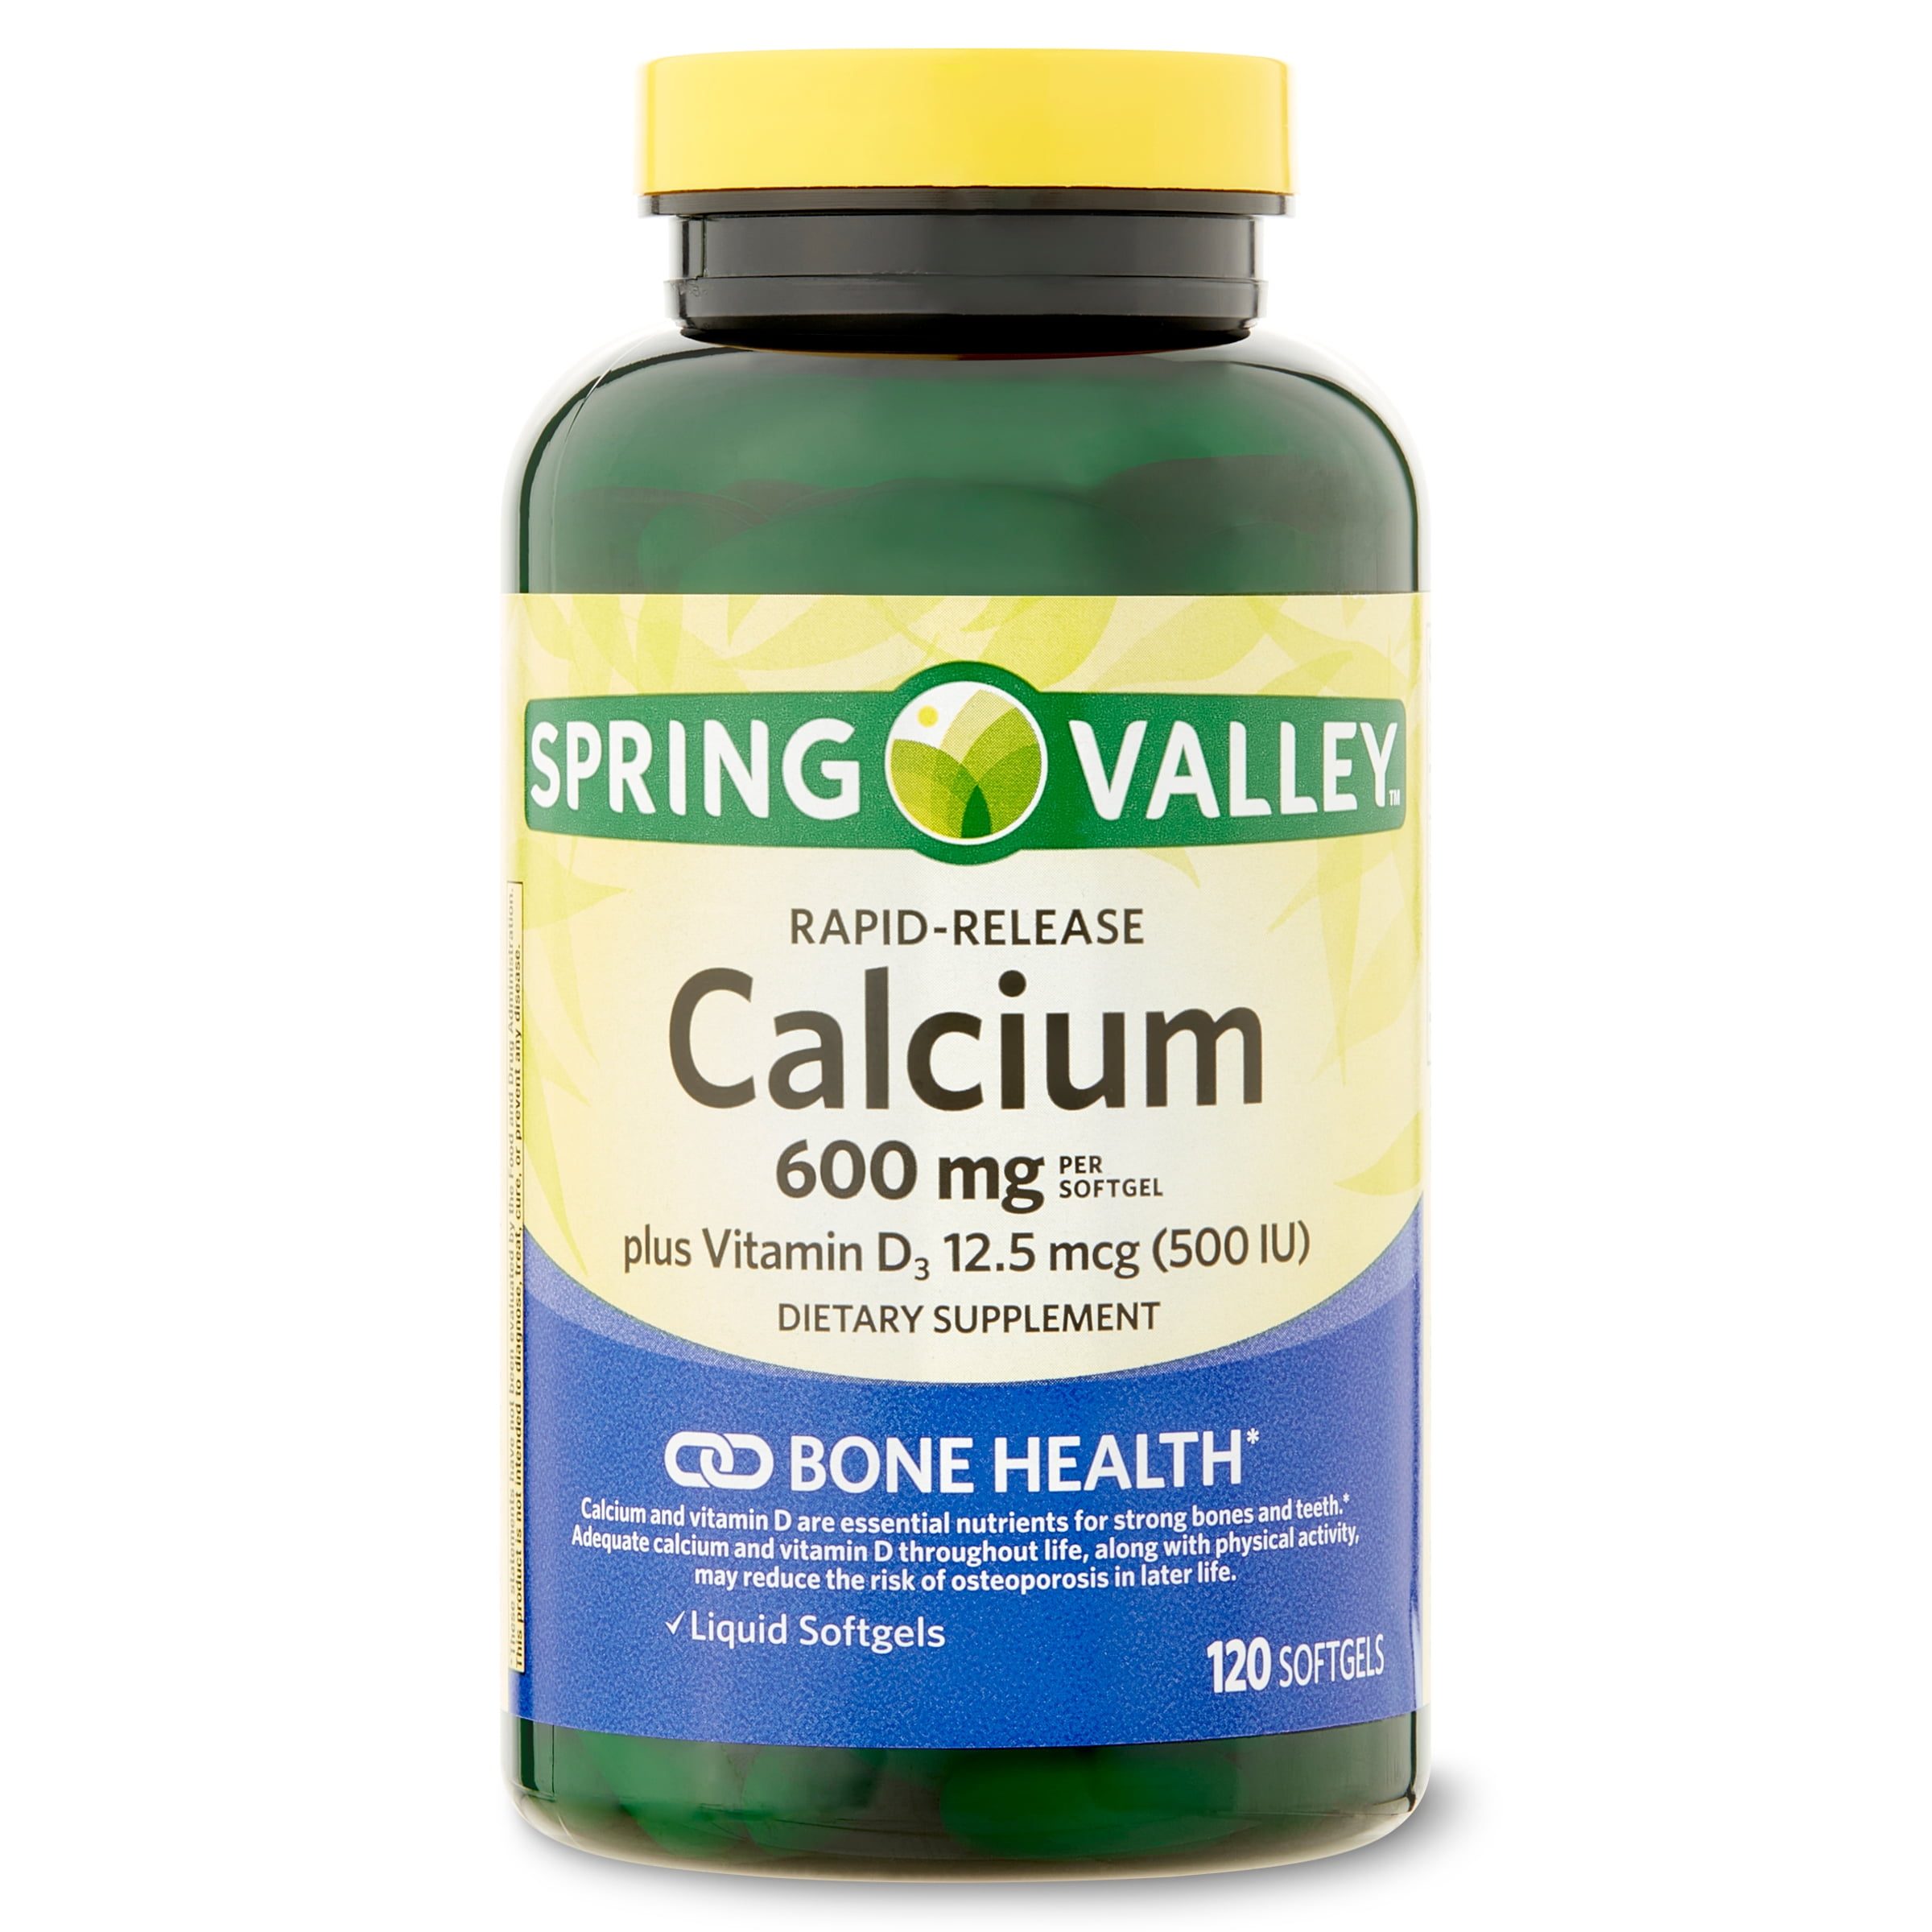 Spring Valley Rapid-Release Calcium, Dietary Supplement, Softgel Capsules, 600 mg, 120 Count